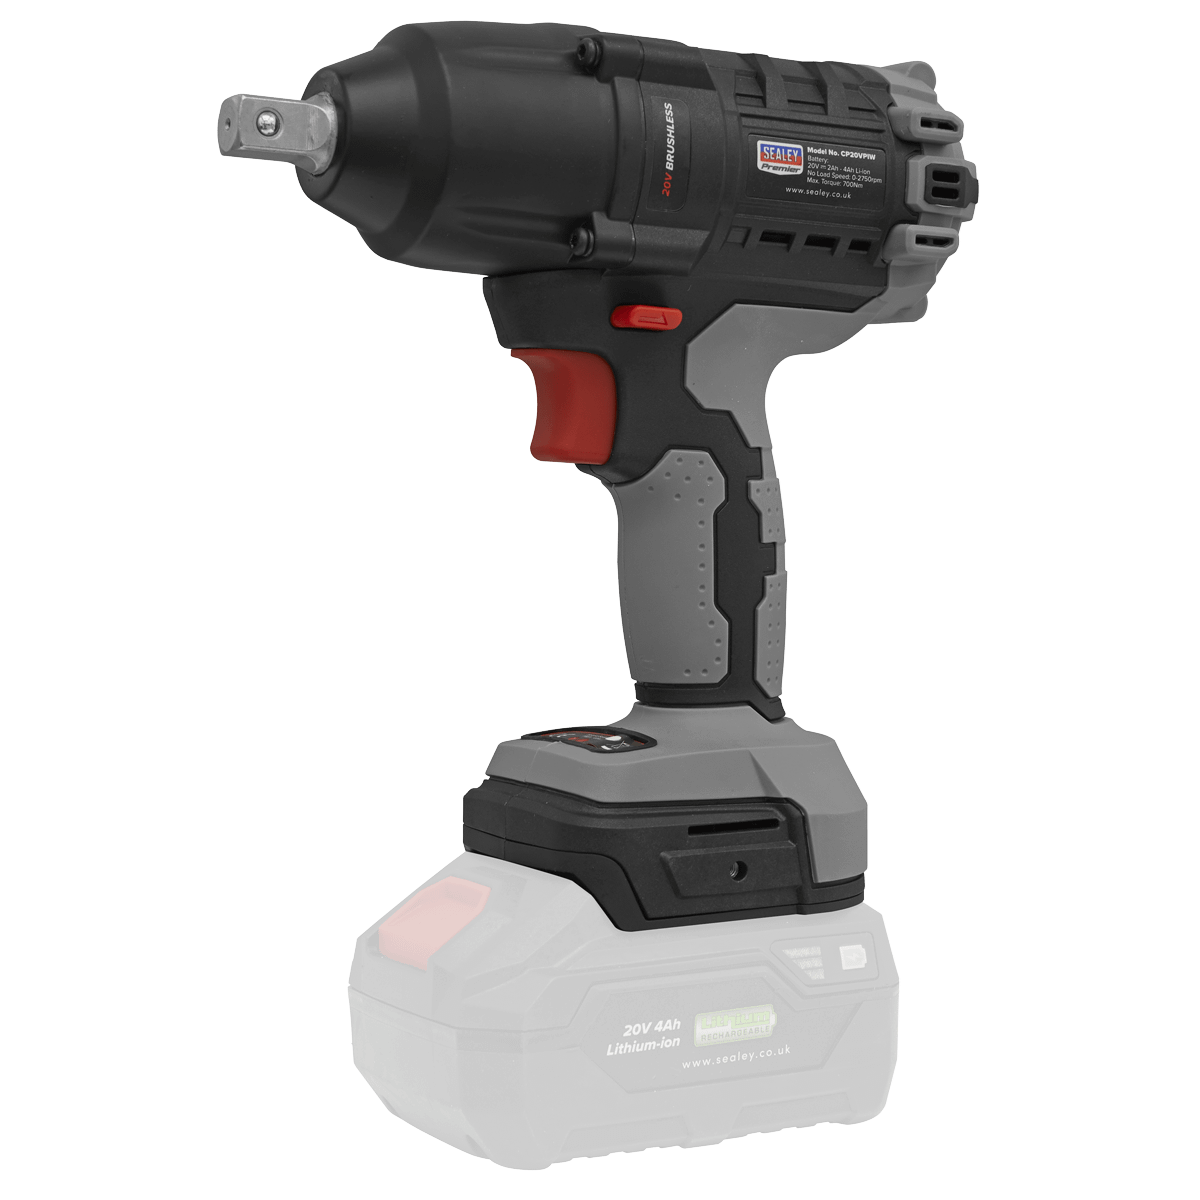 Sealey Brushless Impact Wrench 20V SV20 Series 1/2"Sq Drive